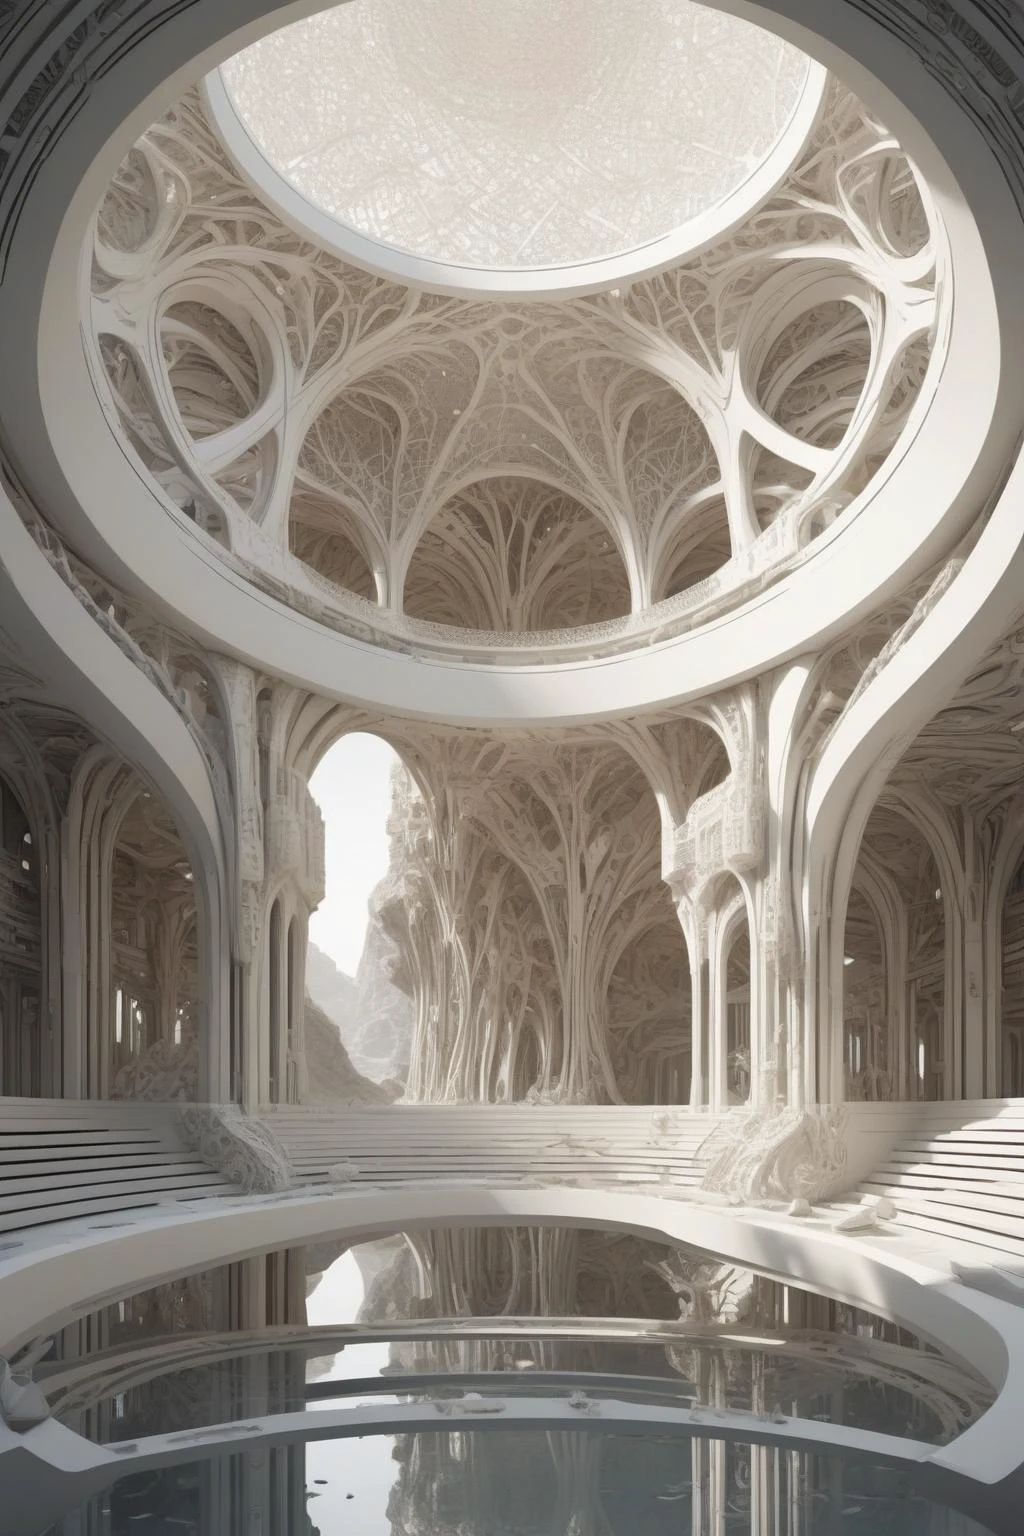 by Charles Schridde,ivory,Terragen,extremely beautiful,intricate details,masterpiece,best quality,
Futuristic style,sleek,modern,ultra modern,high tech,detailed,Ornate And Intricate,
by Moebius and by Marc Simonetti,in the style of nicola samori,dazzling,analog film,
Architectural style,Clean lines,geometric shapes,minimalist,architectural drawing,highly detailed,